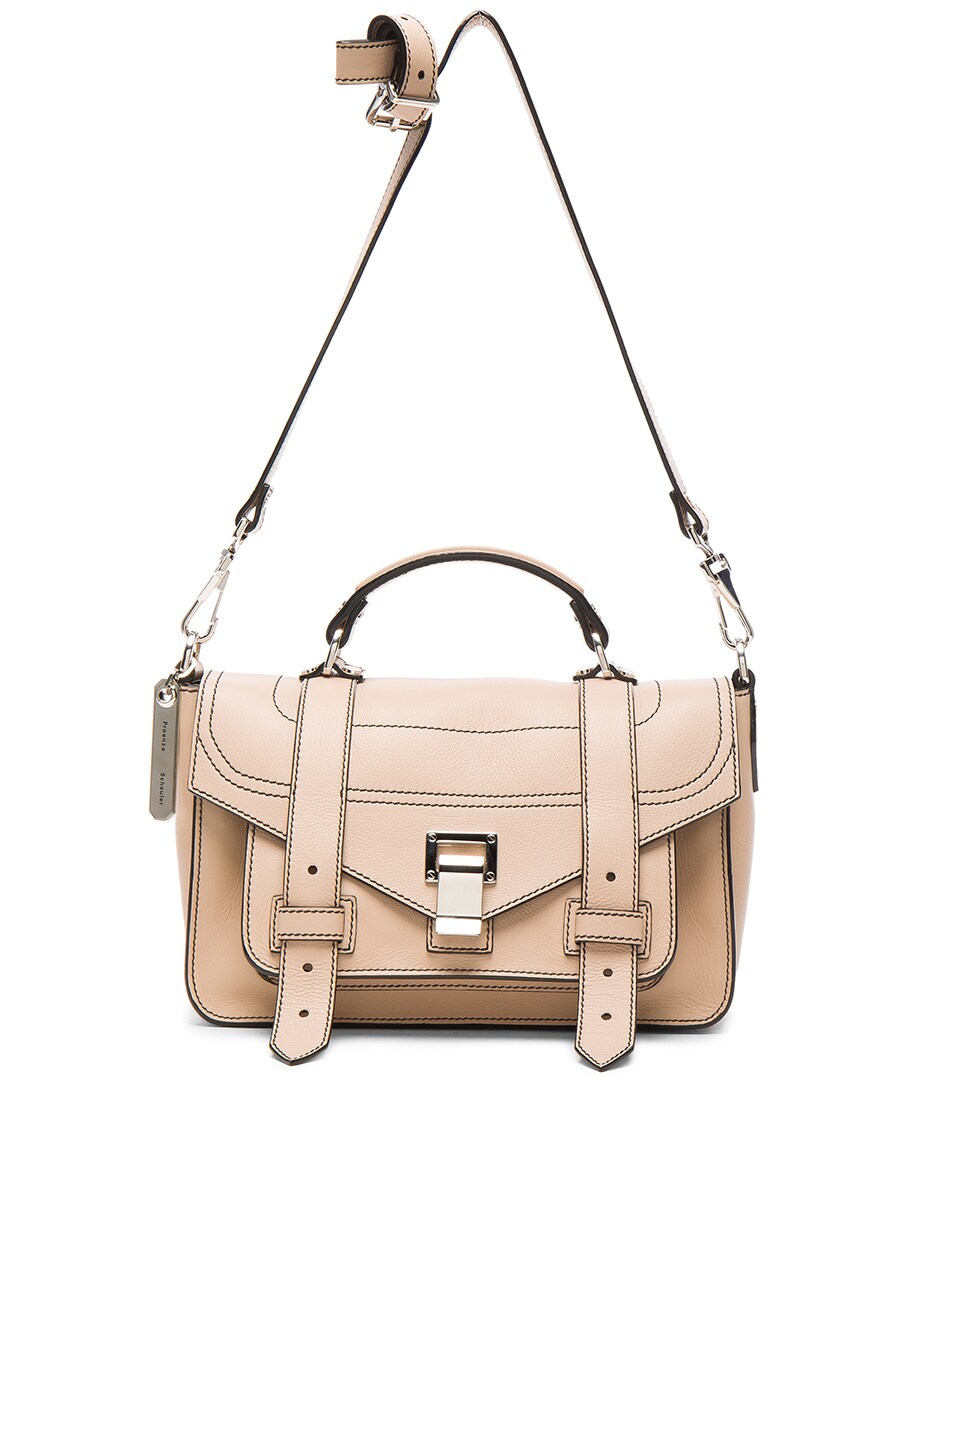 PROENZA SCHOULER Tiny Ps1+ Grainy Calf Leather in Sand | ModeSens